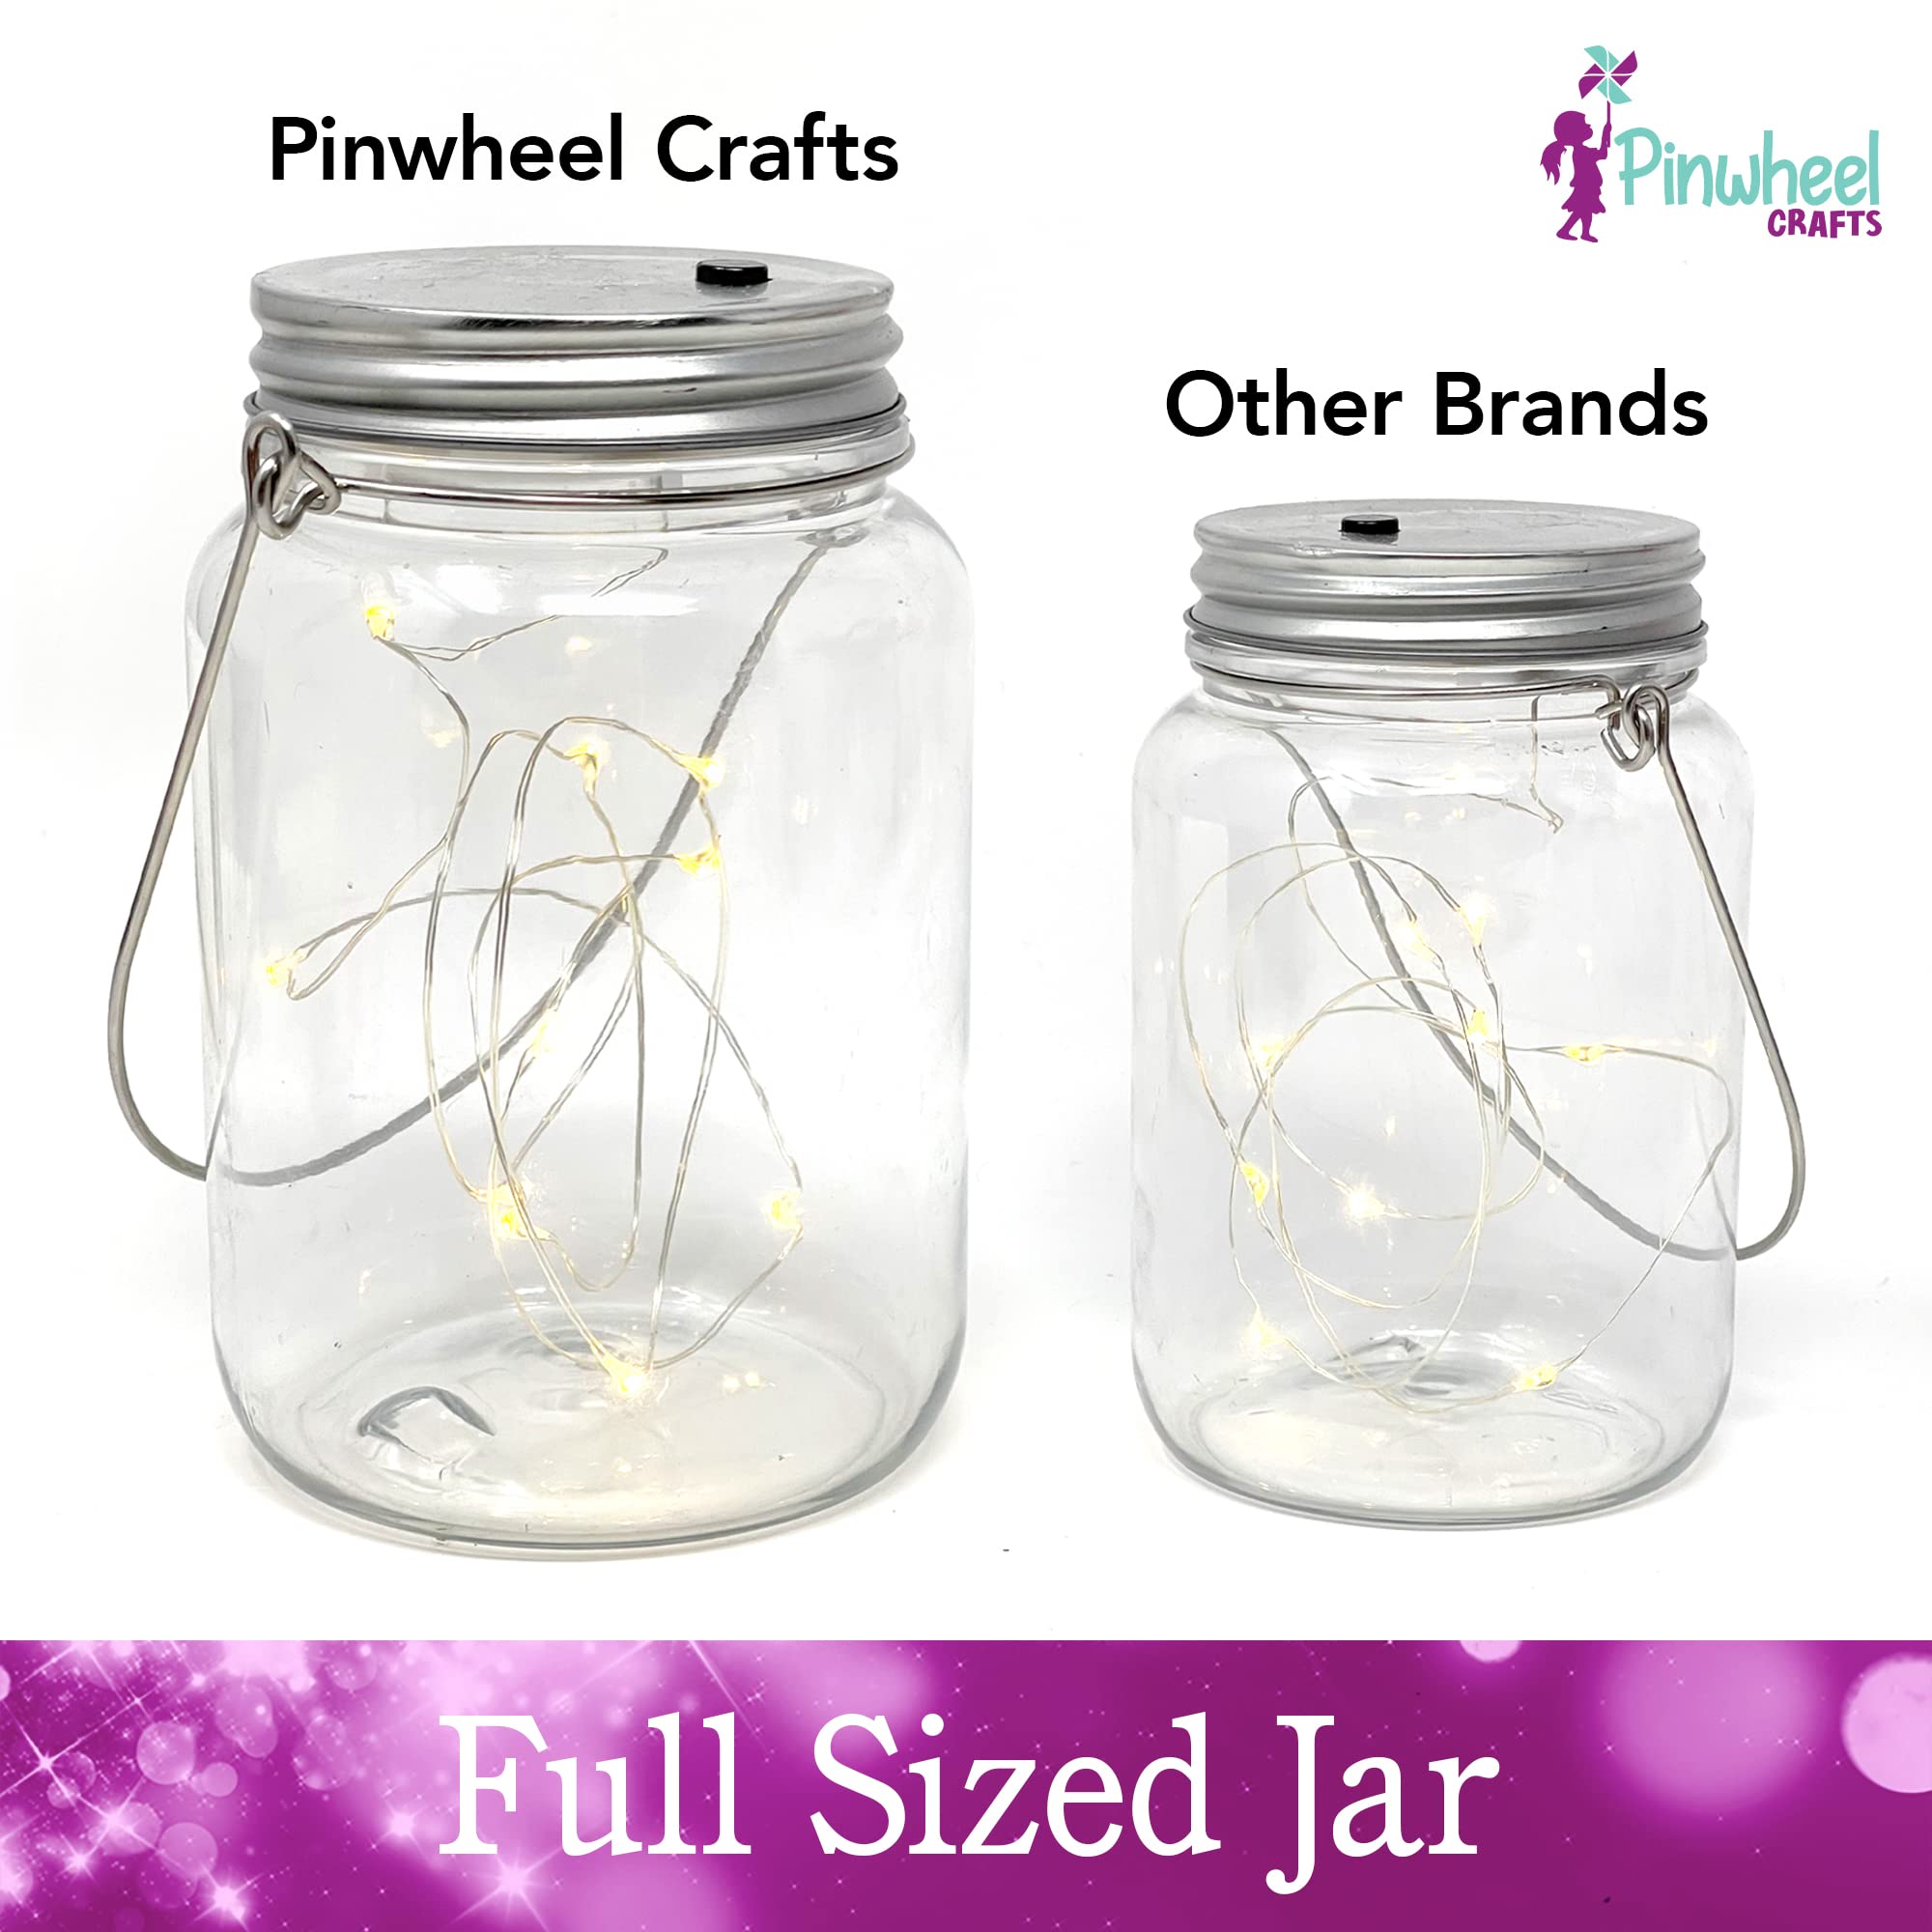 Arts and Crafts for Kids Ages 8-12: Fairy Jar Kit – Make Your Own Fairy Lantern Night Light – Birthday Gift for Girls - Crafts for Girls